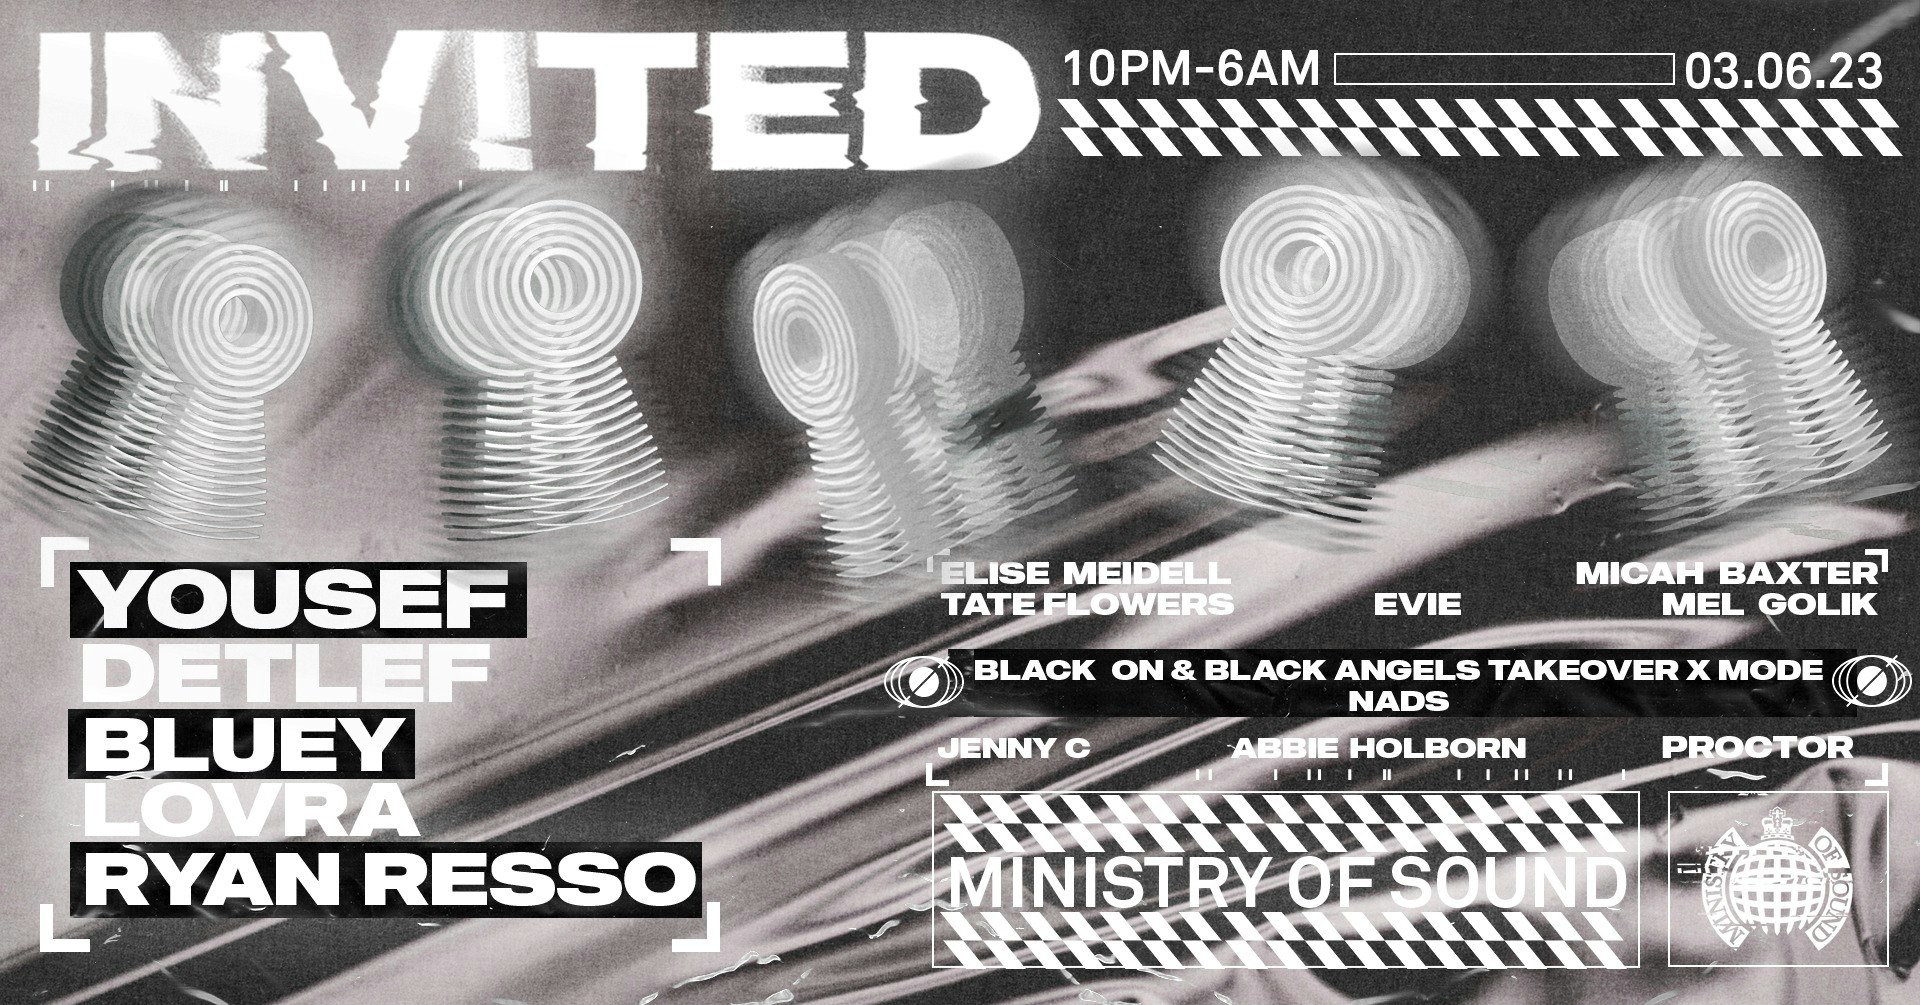 Ministry of Sound Presents: INVITED 👀🗝️ – £5 TONIGHT BOOK NOW!